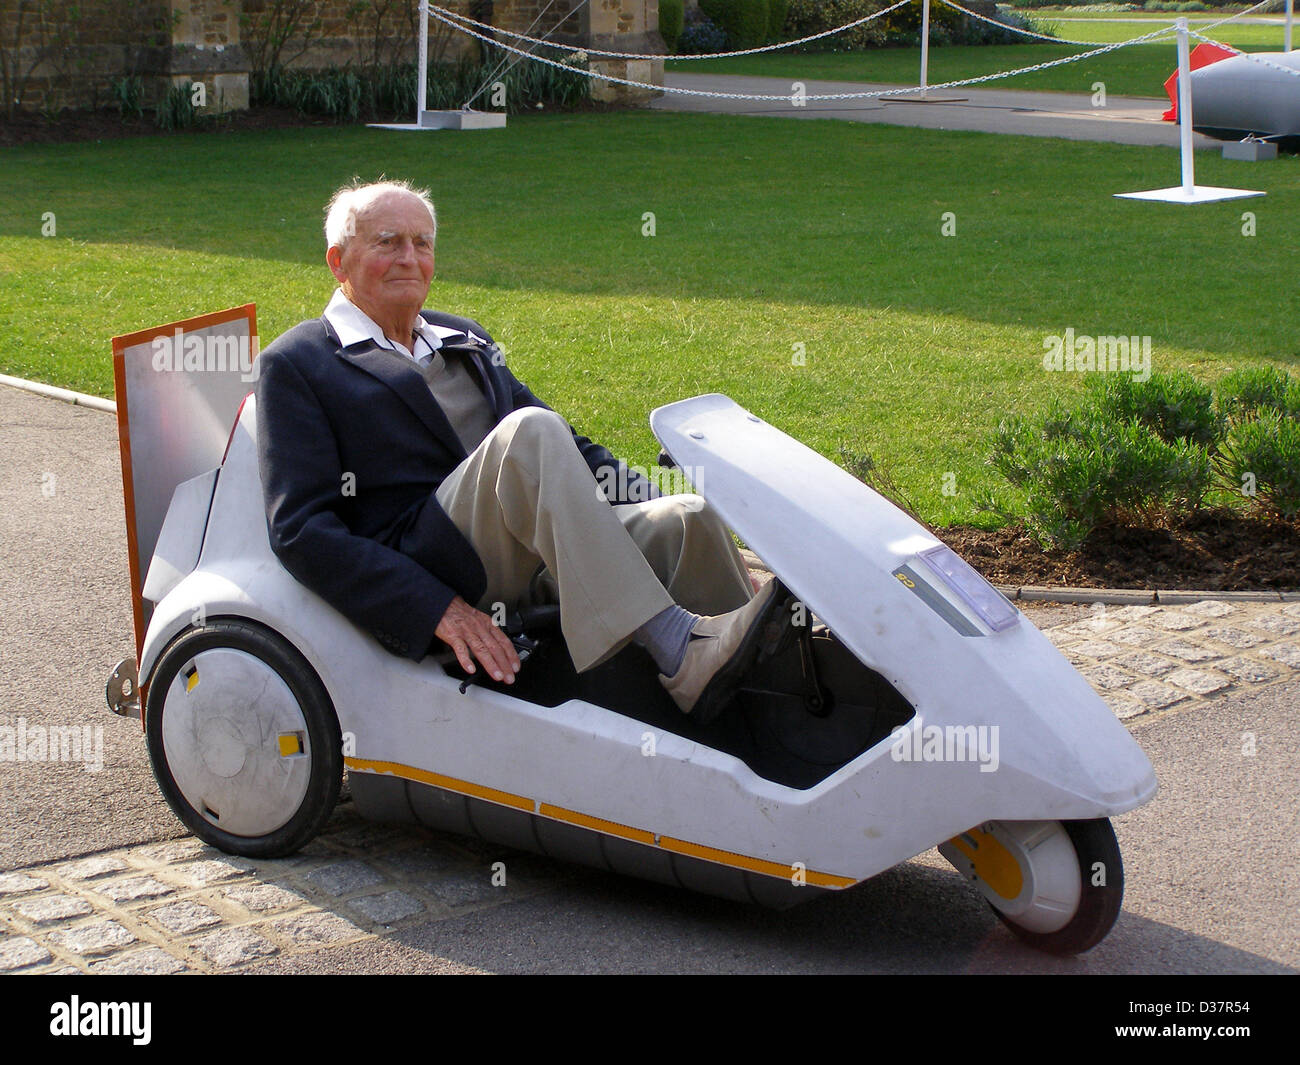 File Picture; Reg Turnill (1915-2013), aerospace correspondent for over 65 years, pilots  a rocket-powered Sinclair C5 electric tricycle, at the British Rocketry Oral History Project conference in 2007, Charterhouse School, Surrey, England. UK. Mr Turnill passed away peacefully in the early hours of this morning, 12th Feb 2013, at the Pilgrim's Hospice in Ashford, where he had been for the past month. Stock Photo